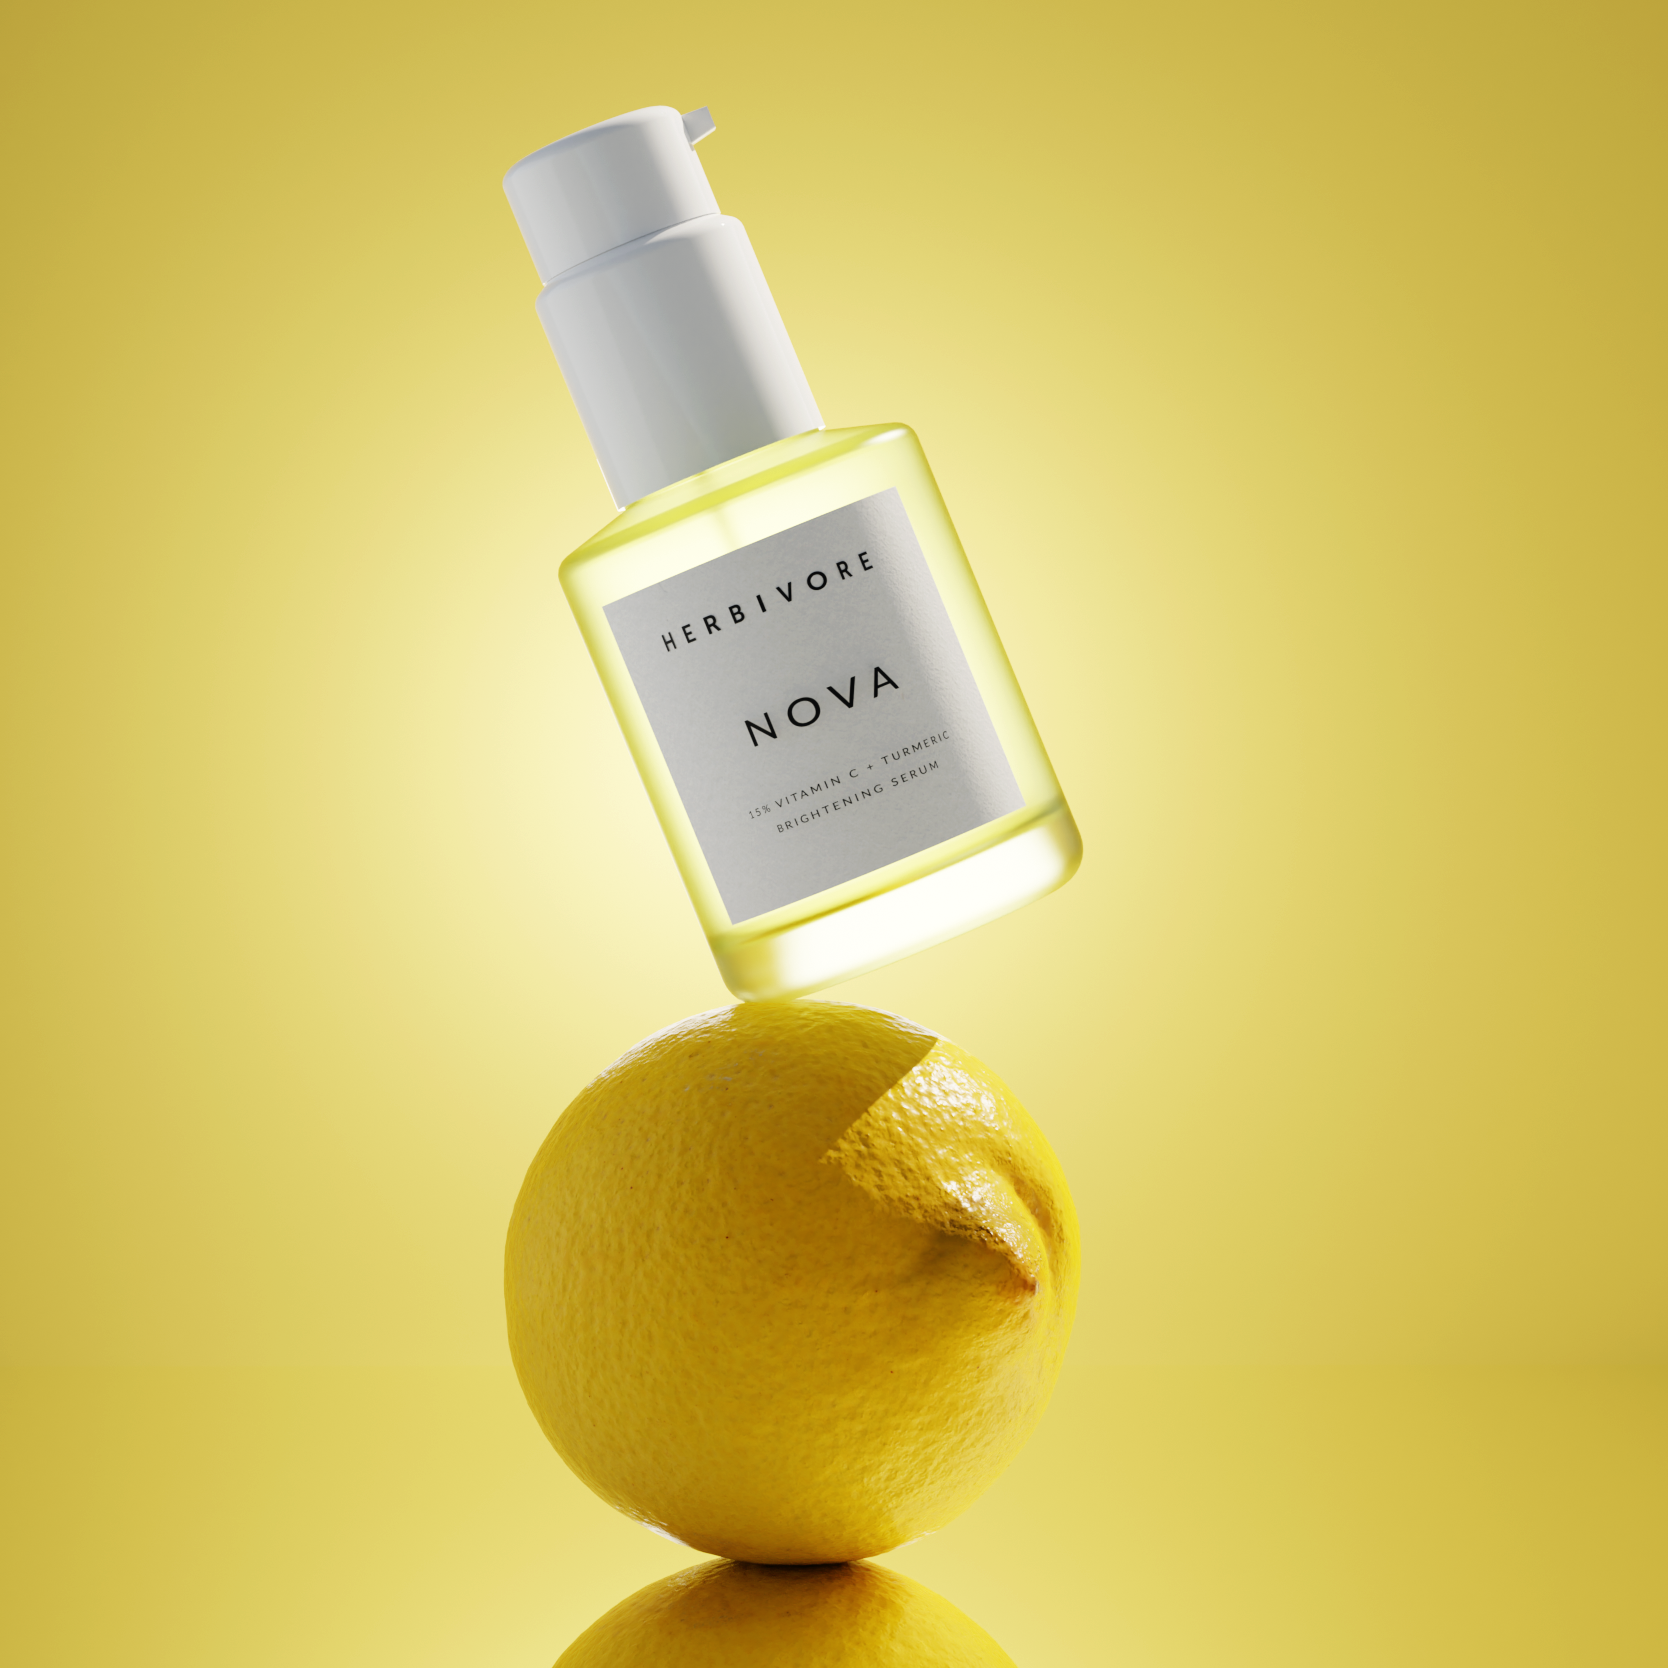 A CGI product shot of Herbivore Botanicals serum bottle placed on top of lemon with a yellow background 